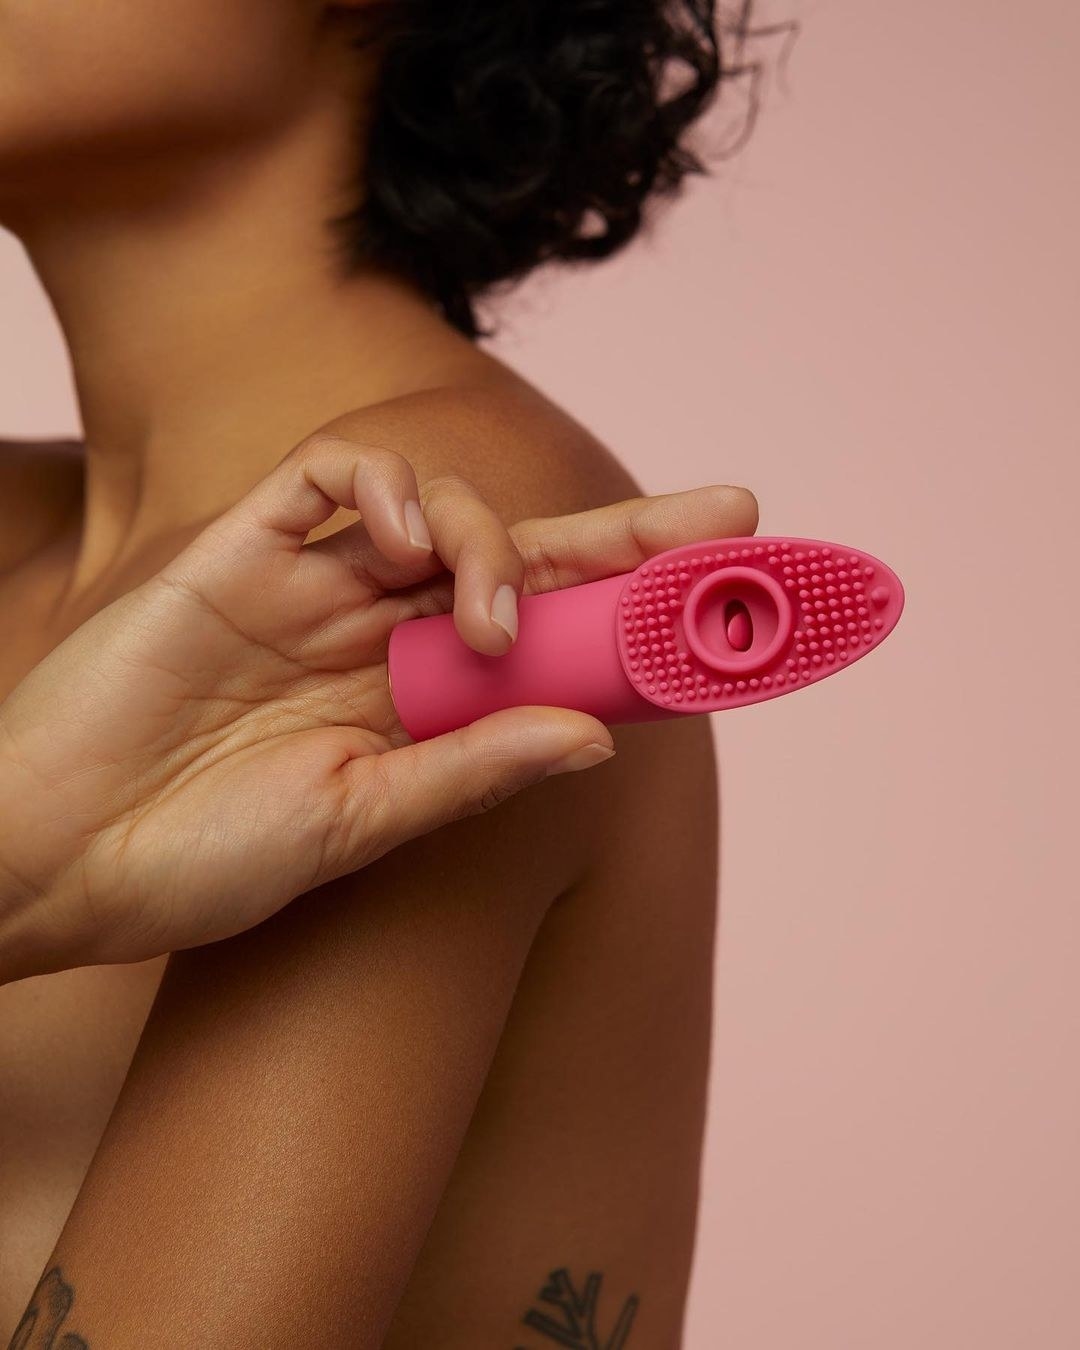 A model holding the vibrator and showing off its 105 textured rods